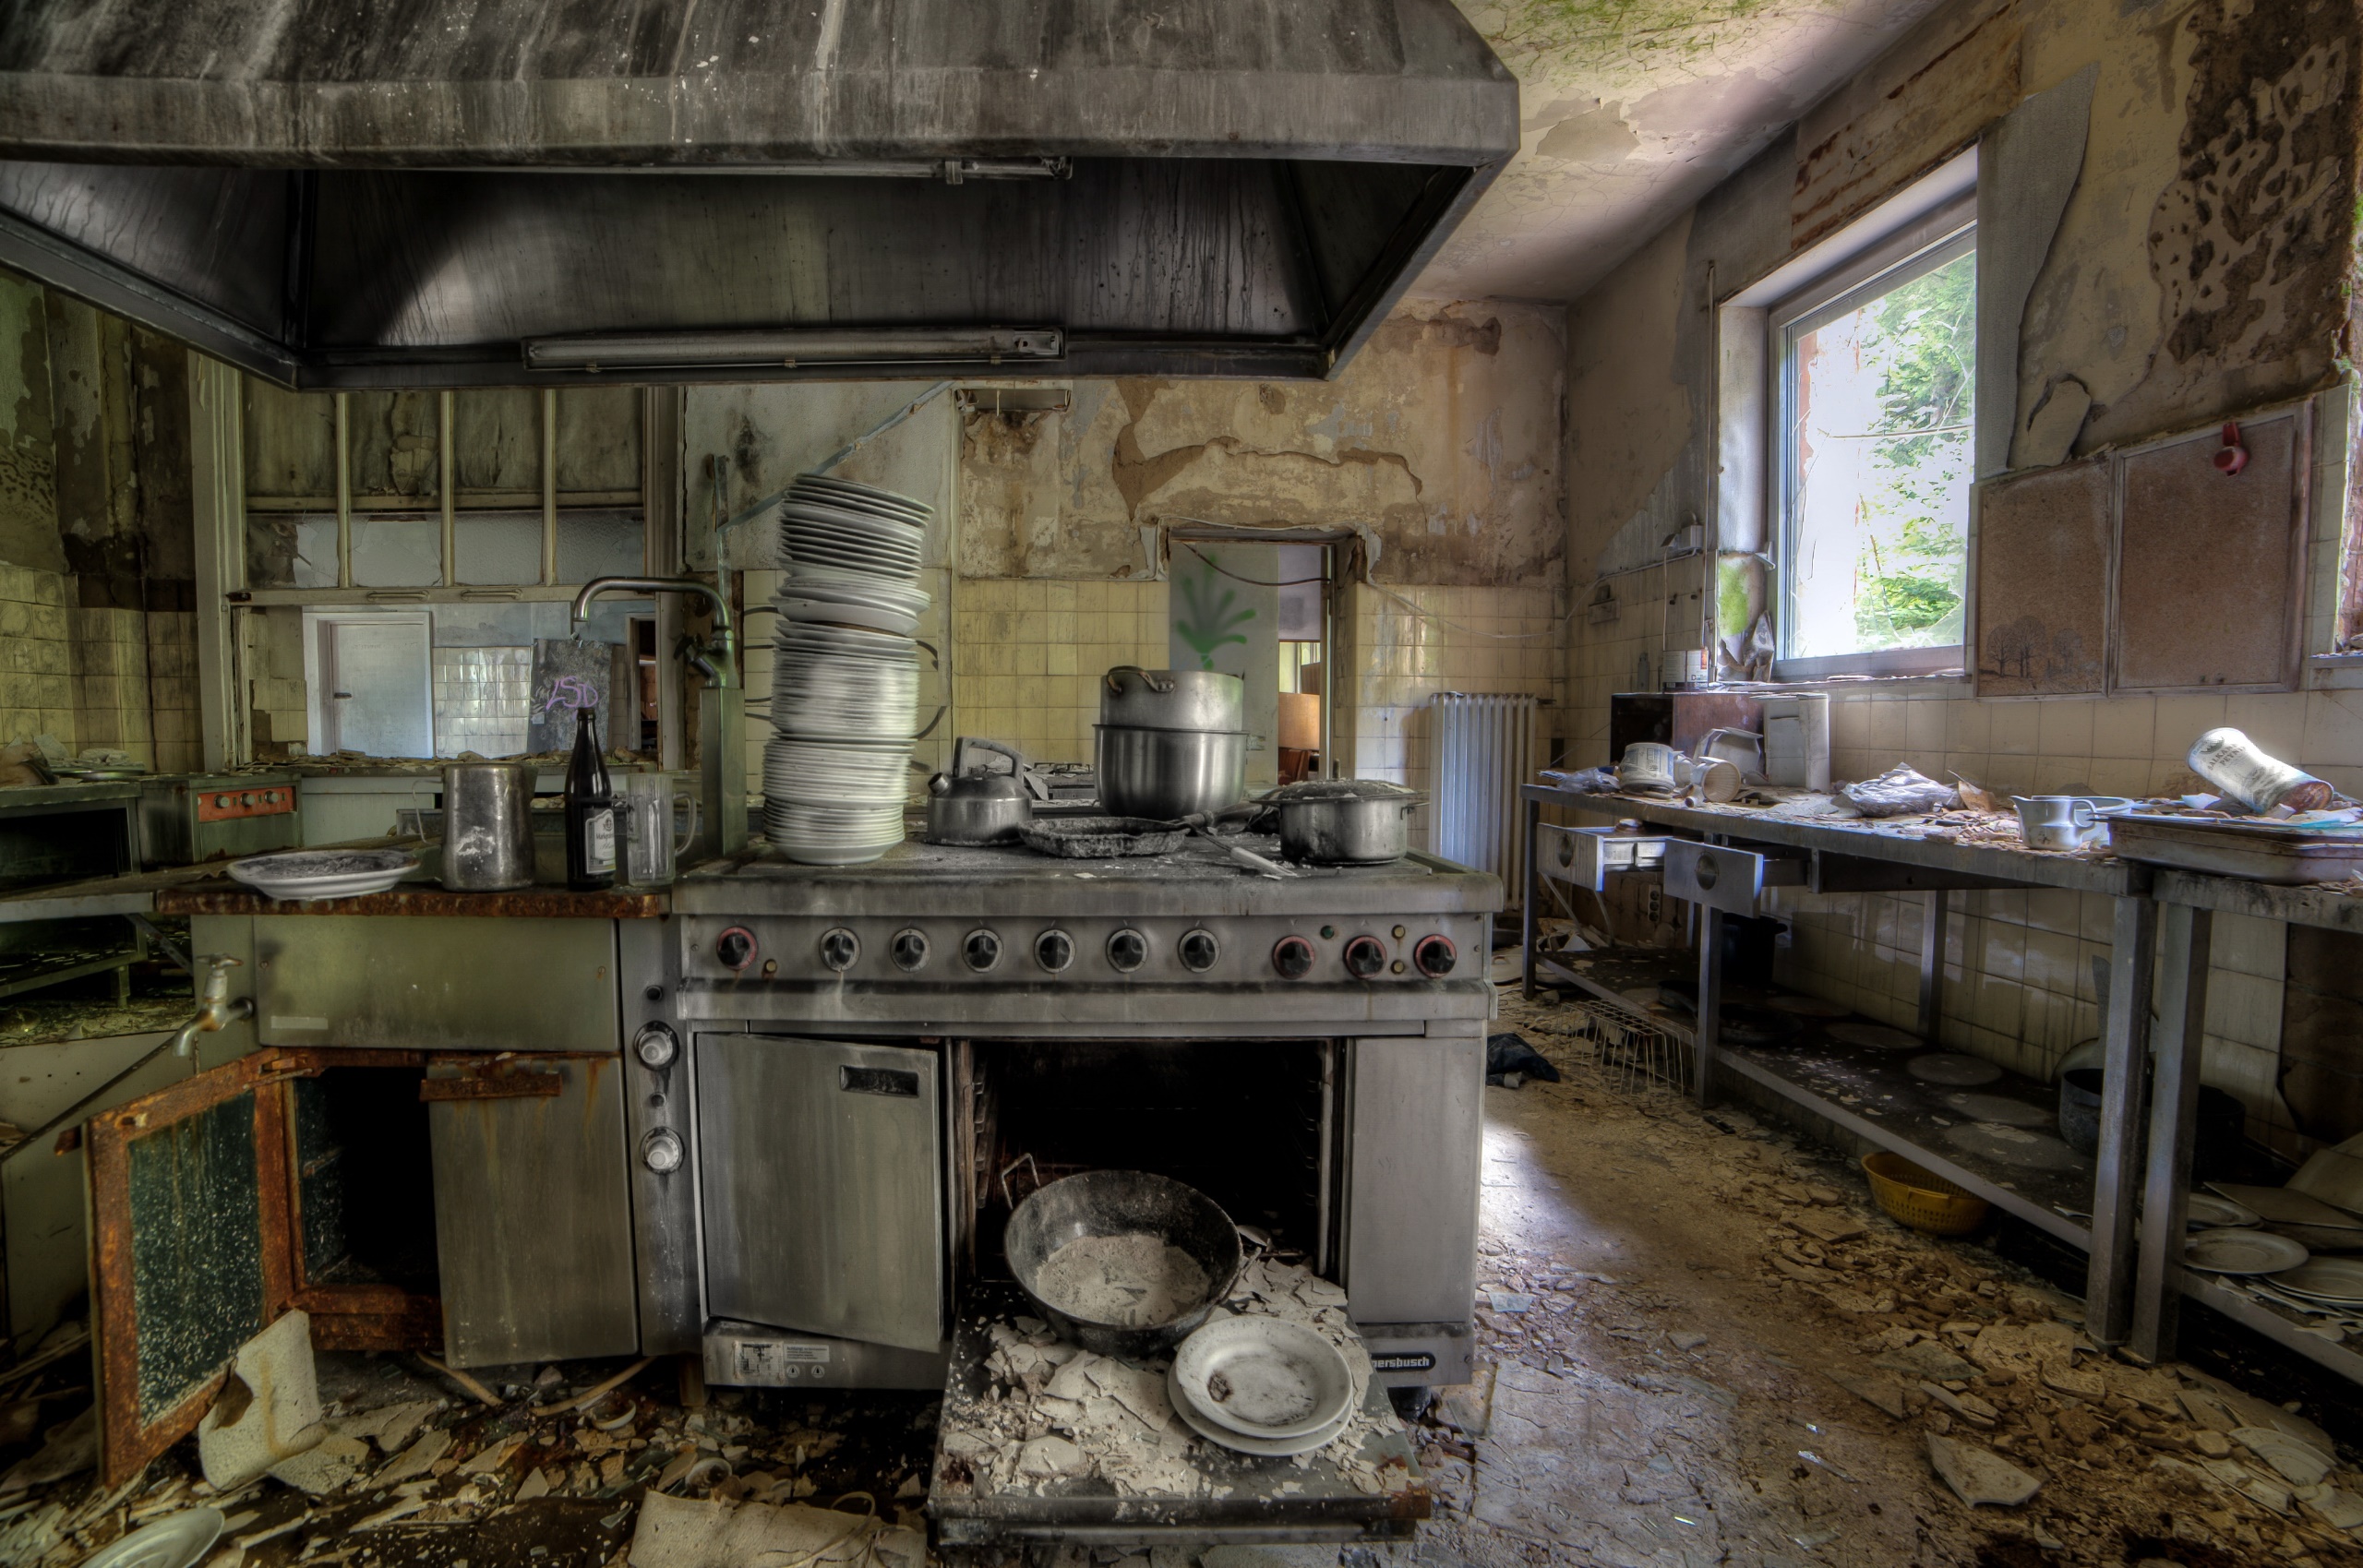 General 2560x1699 kitchen old abandoned HDR